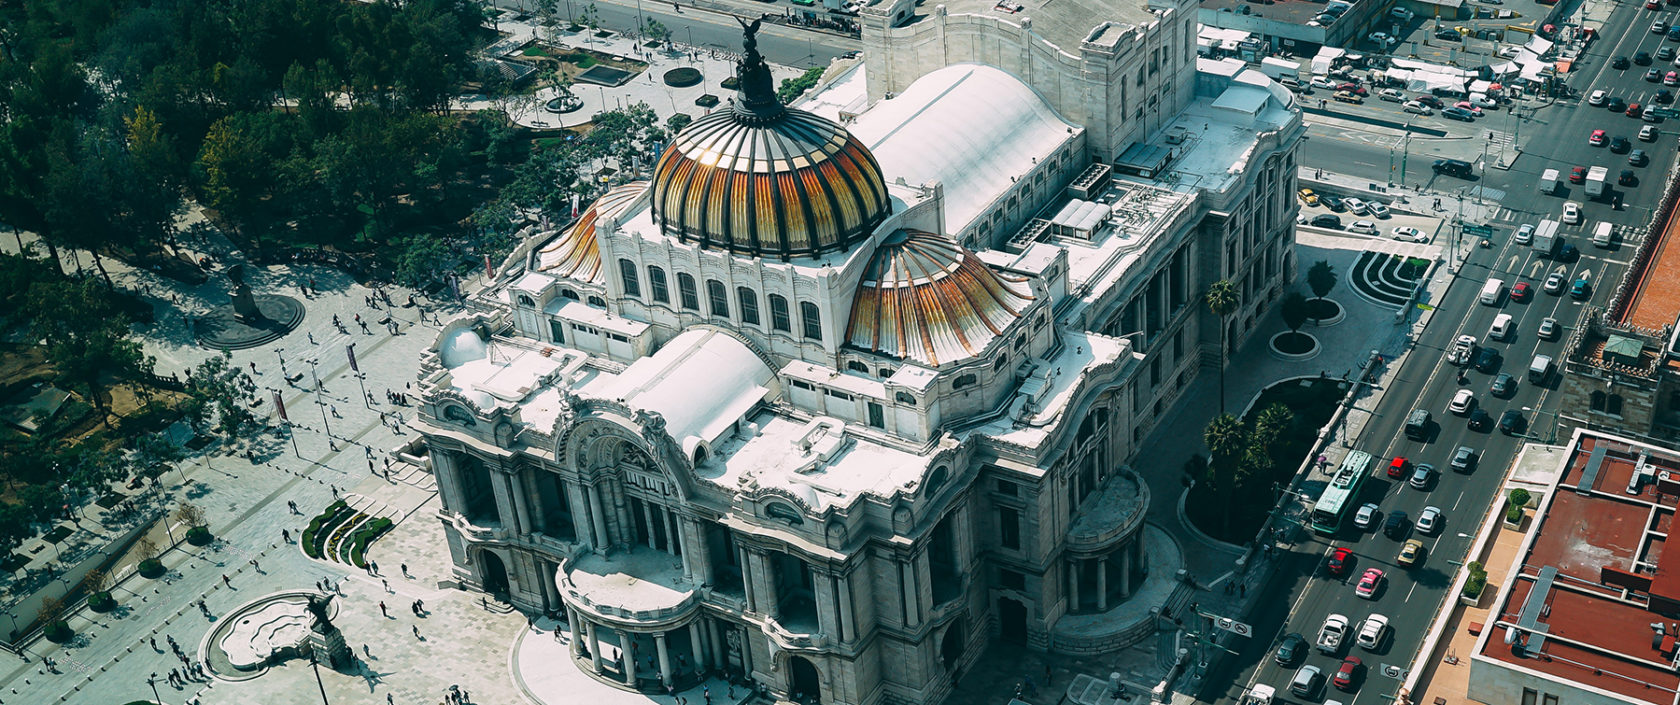 photo of a building in mexico city